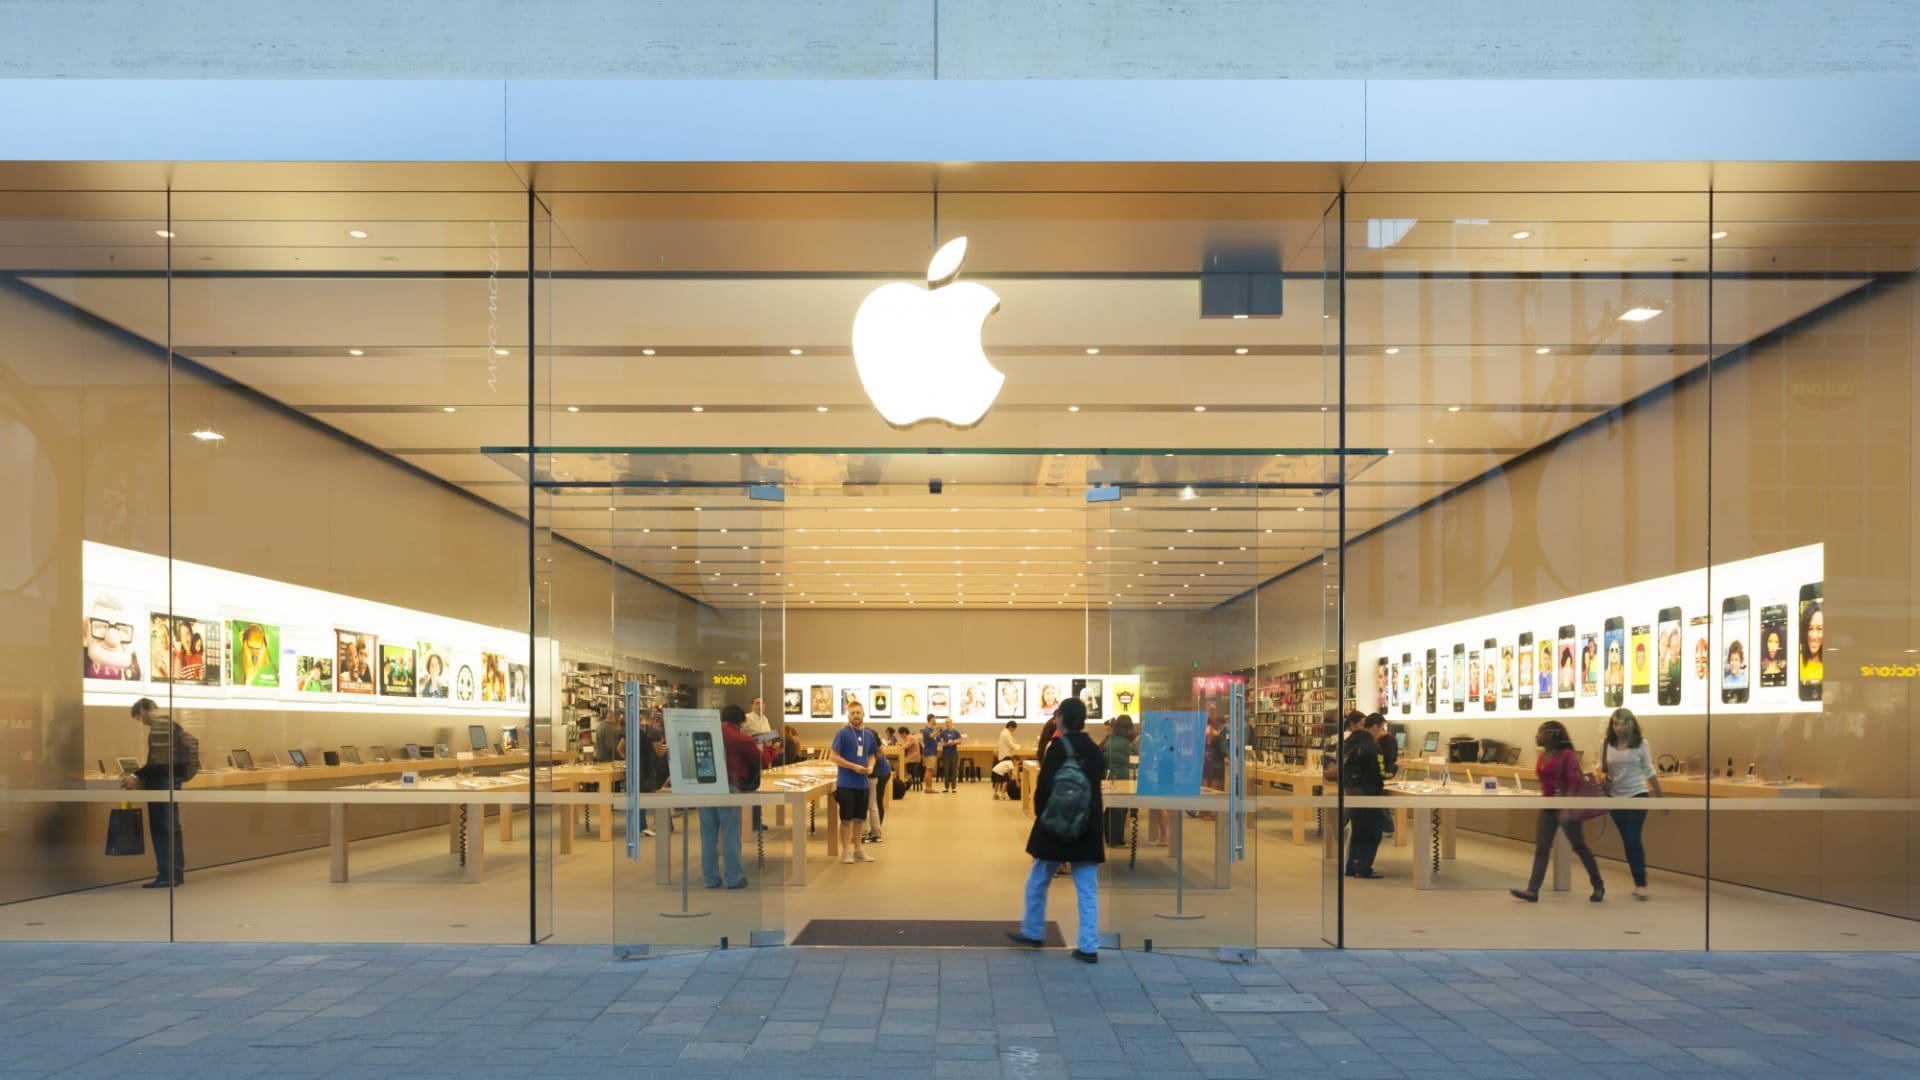 This Simple Email From Apple Is a Brilliant Example of How to Delight Your Customers